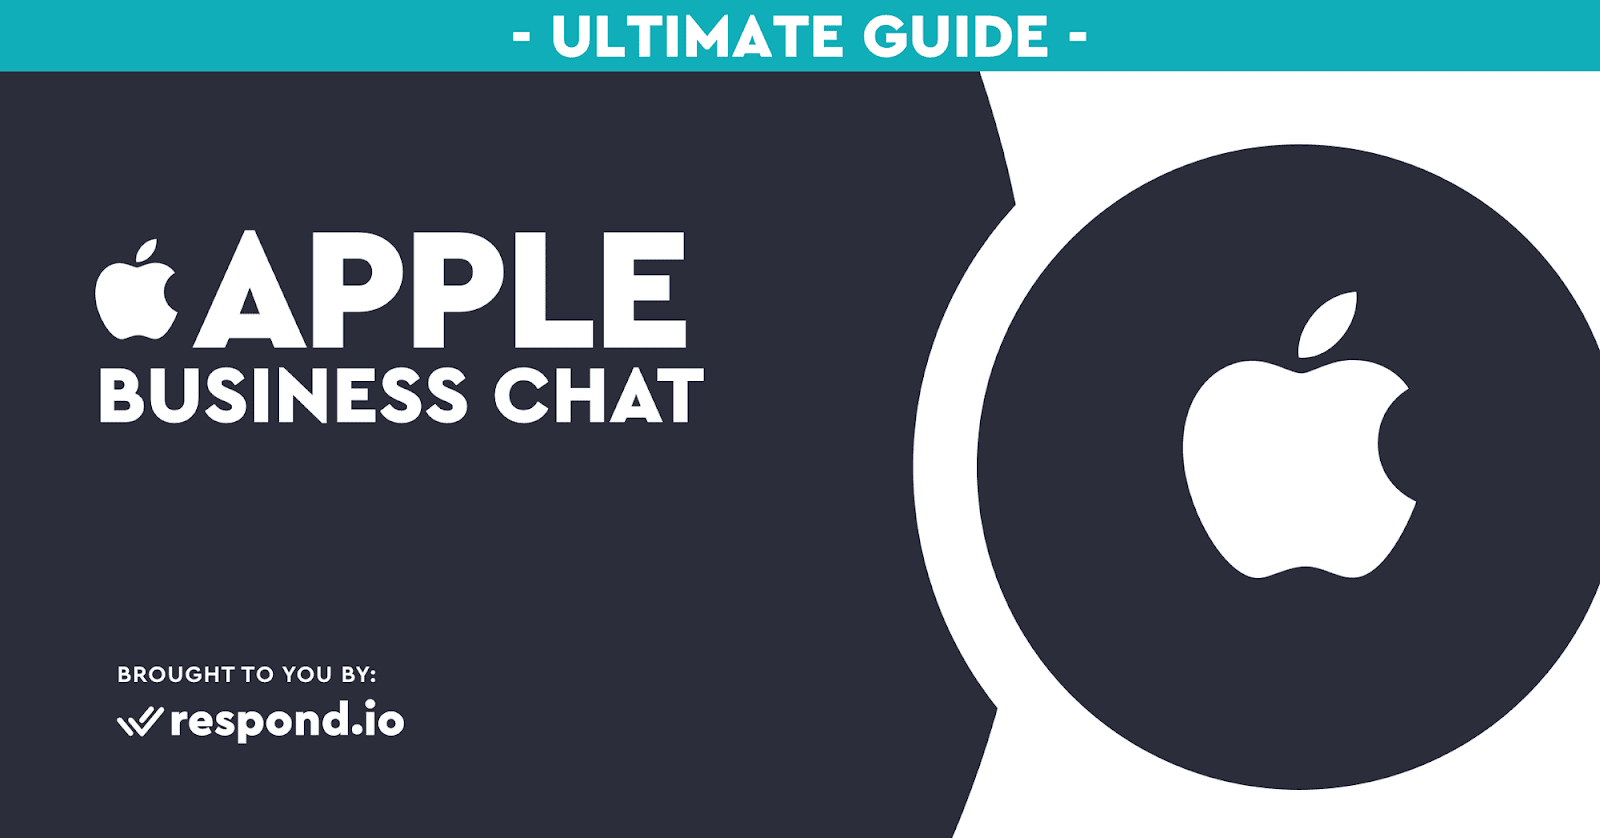 The Ultimate Guide to Apple Business Chat